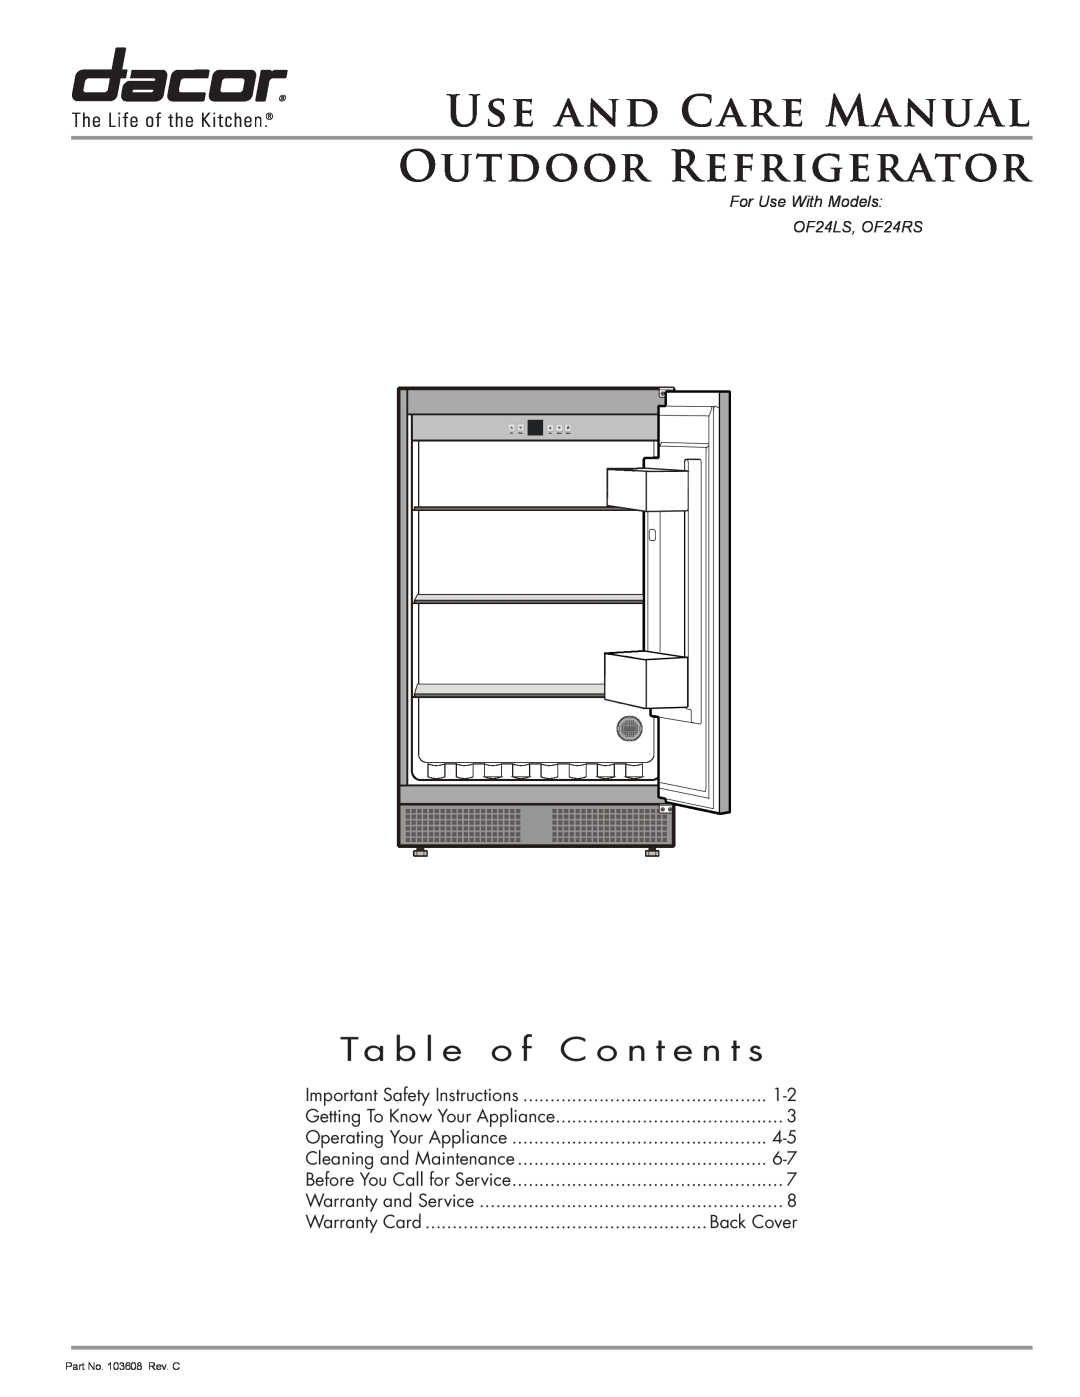 Dacor OF24LS, OF24RS manual Use And Care Manual Outdoor Refrigerator, Ta b l e o f C o n t e n t s, Part No. 103608 Rev. C 